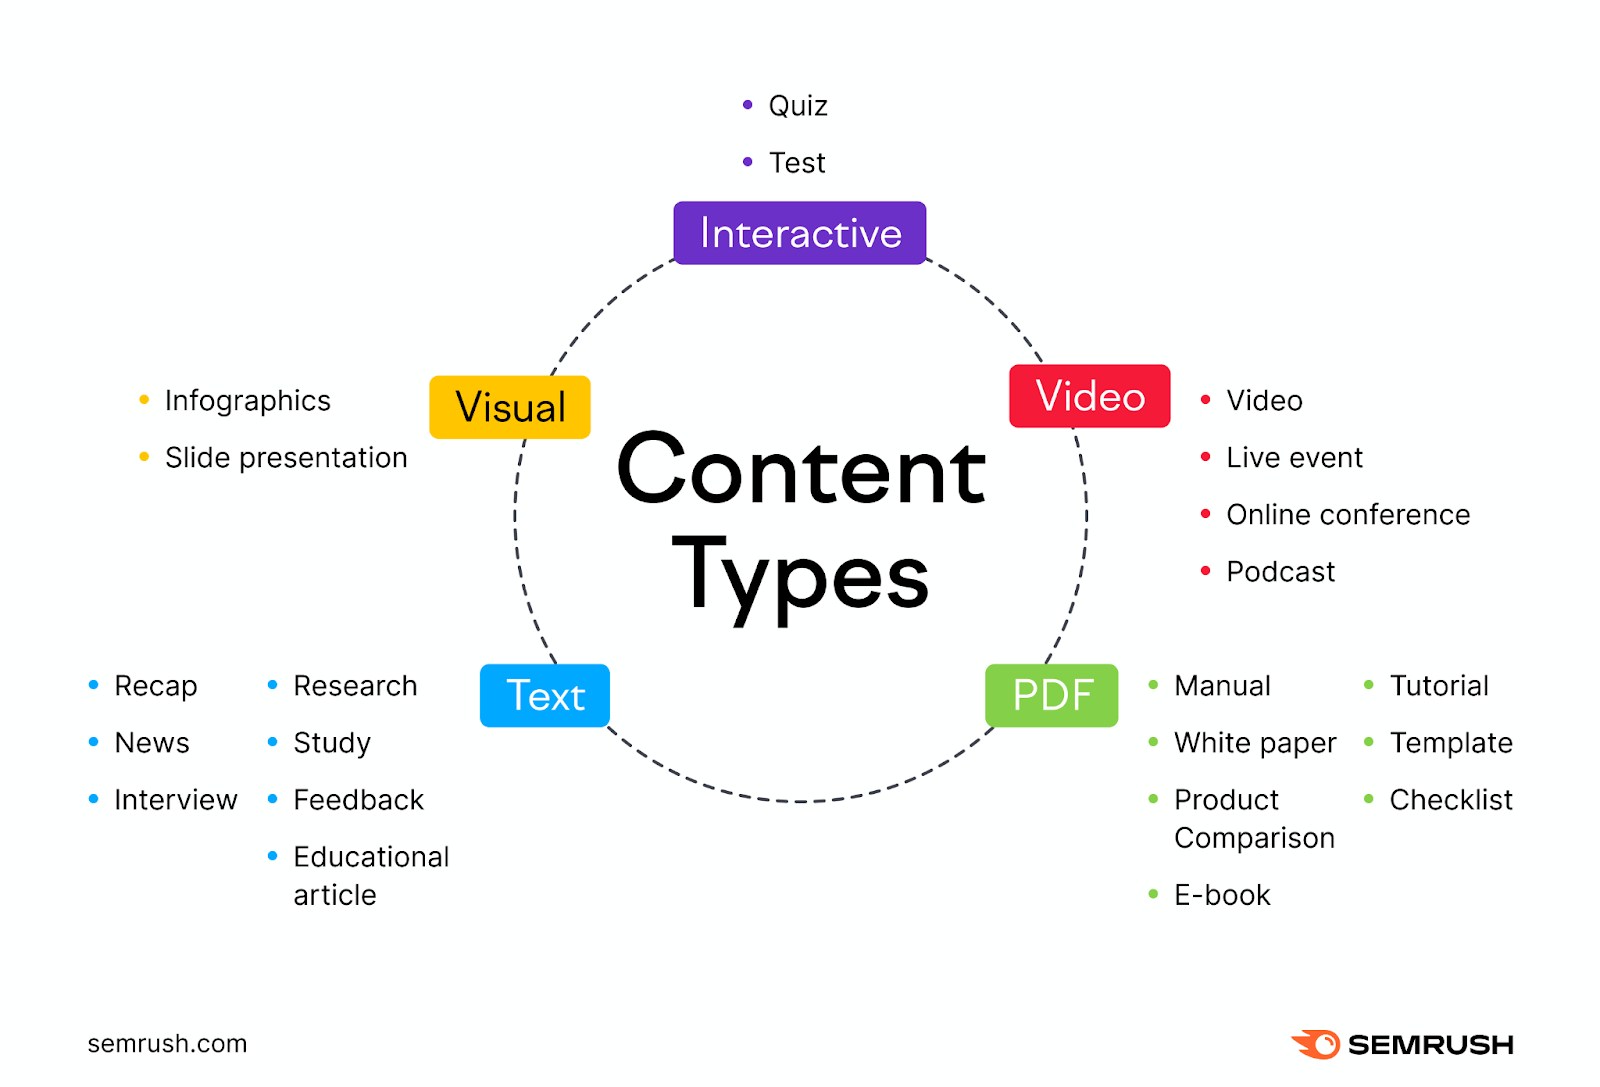 An image showing different content types